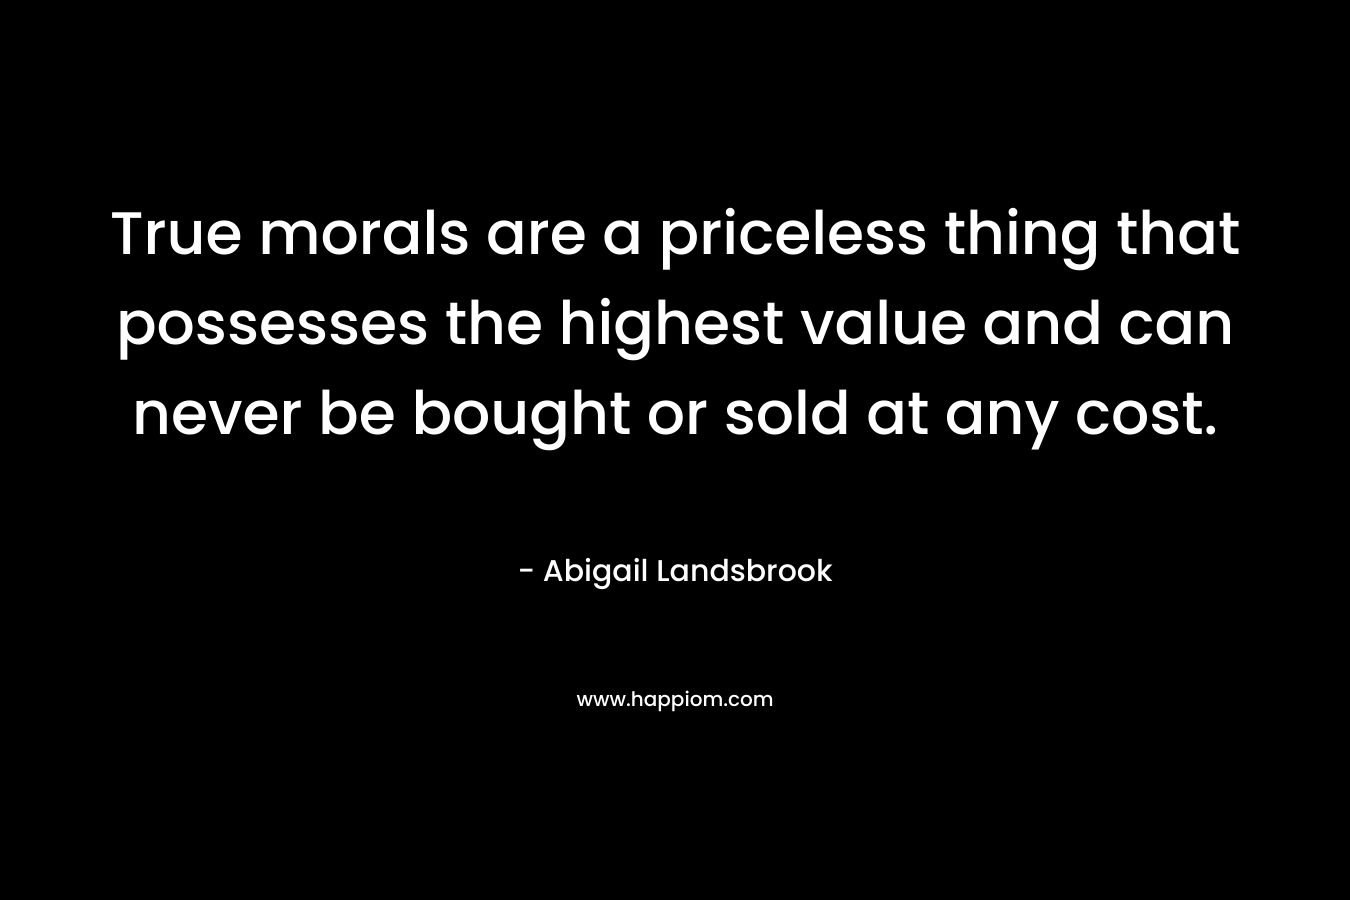 True morals are a priceless thing that possesses the highest value and can never be bought or sold at any cost.